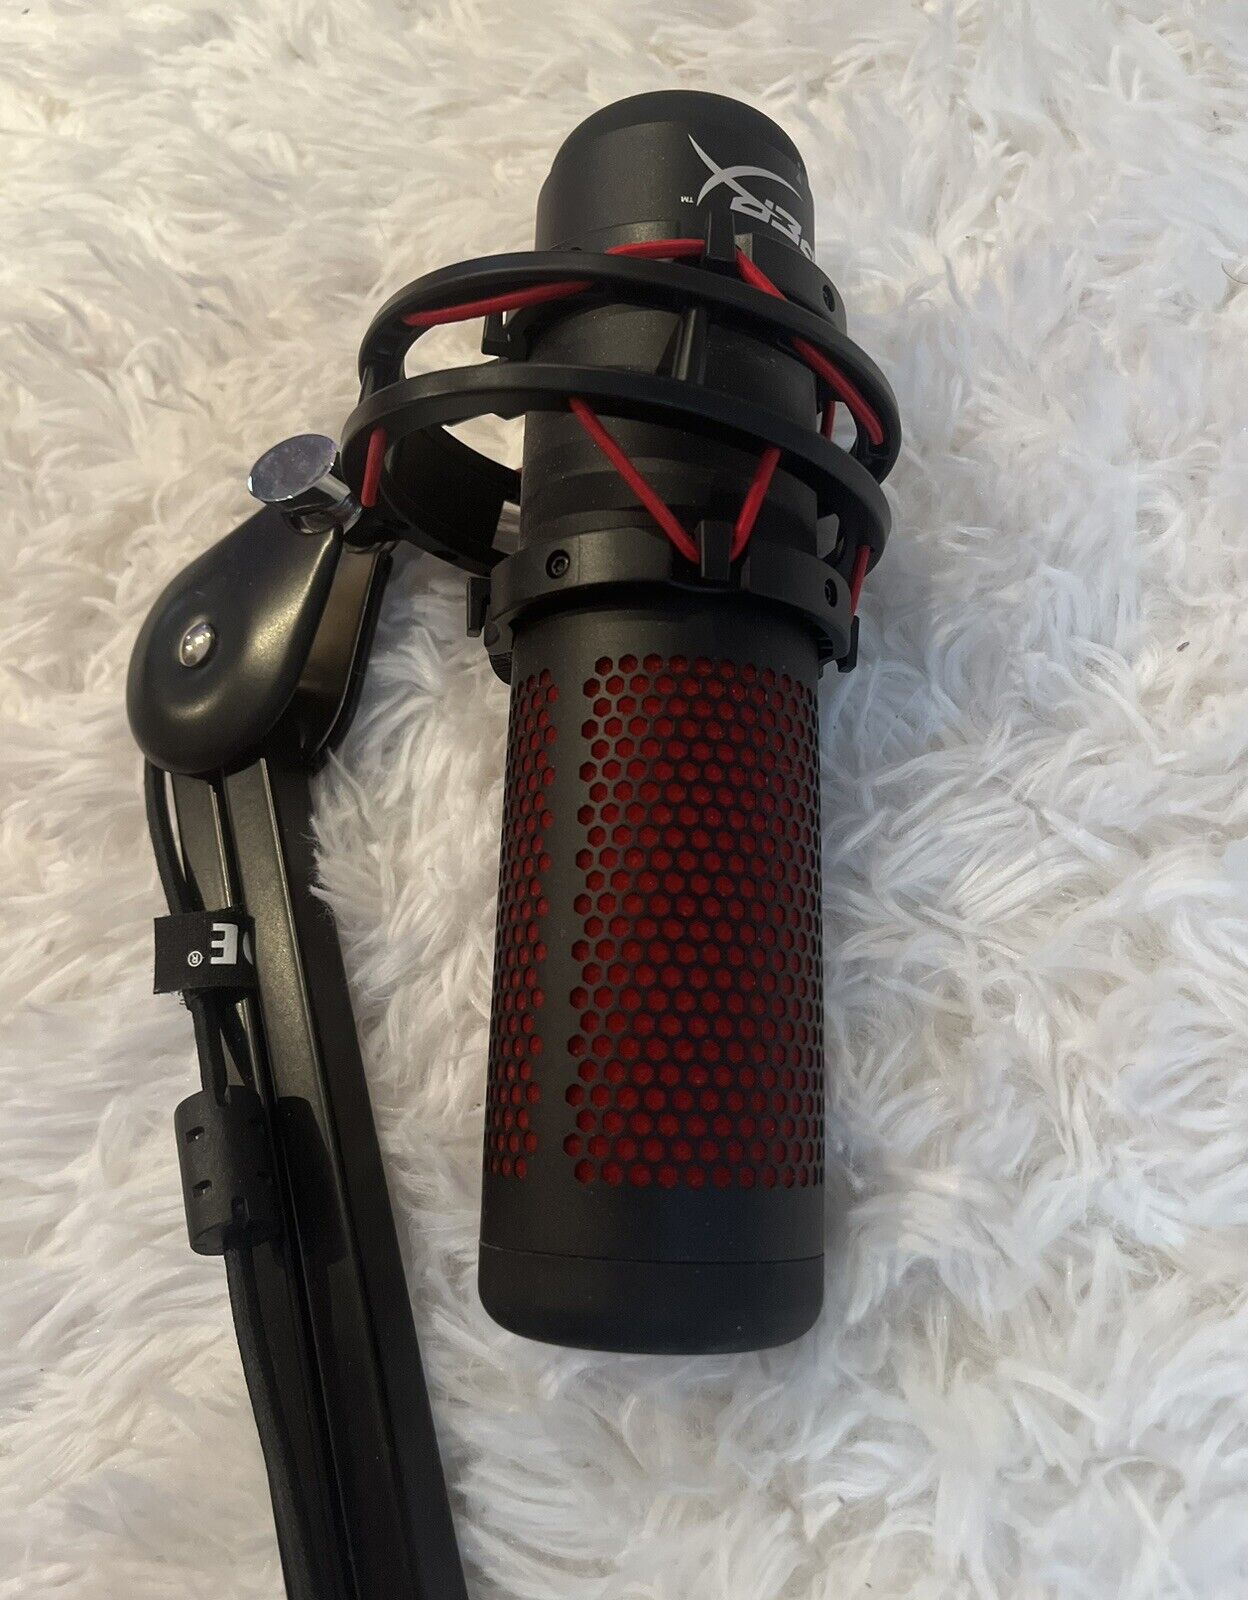 HyperX QuadCast USB Microphone comes with Rode Microphone Arm For Stand